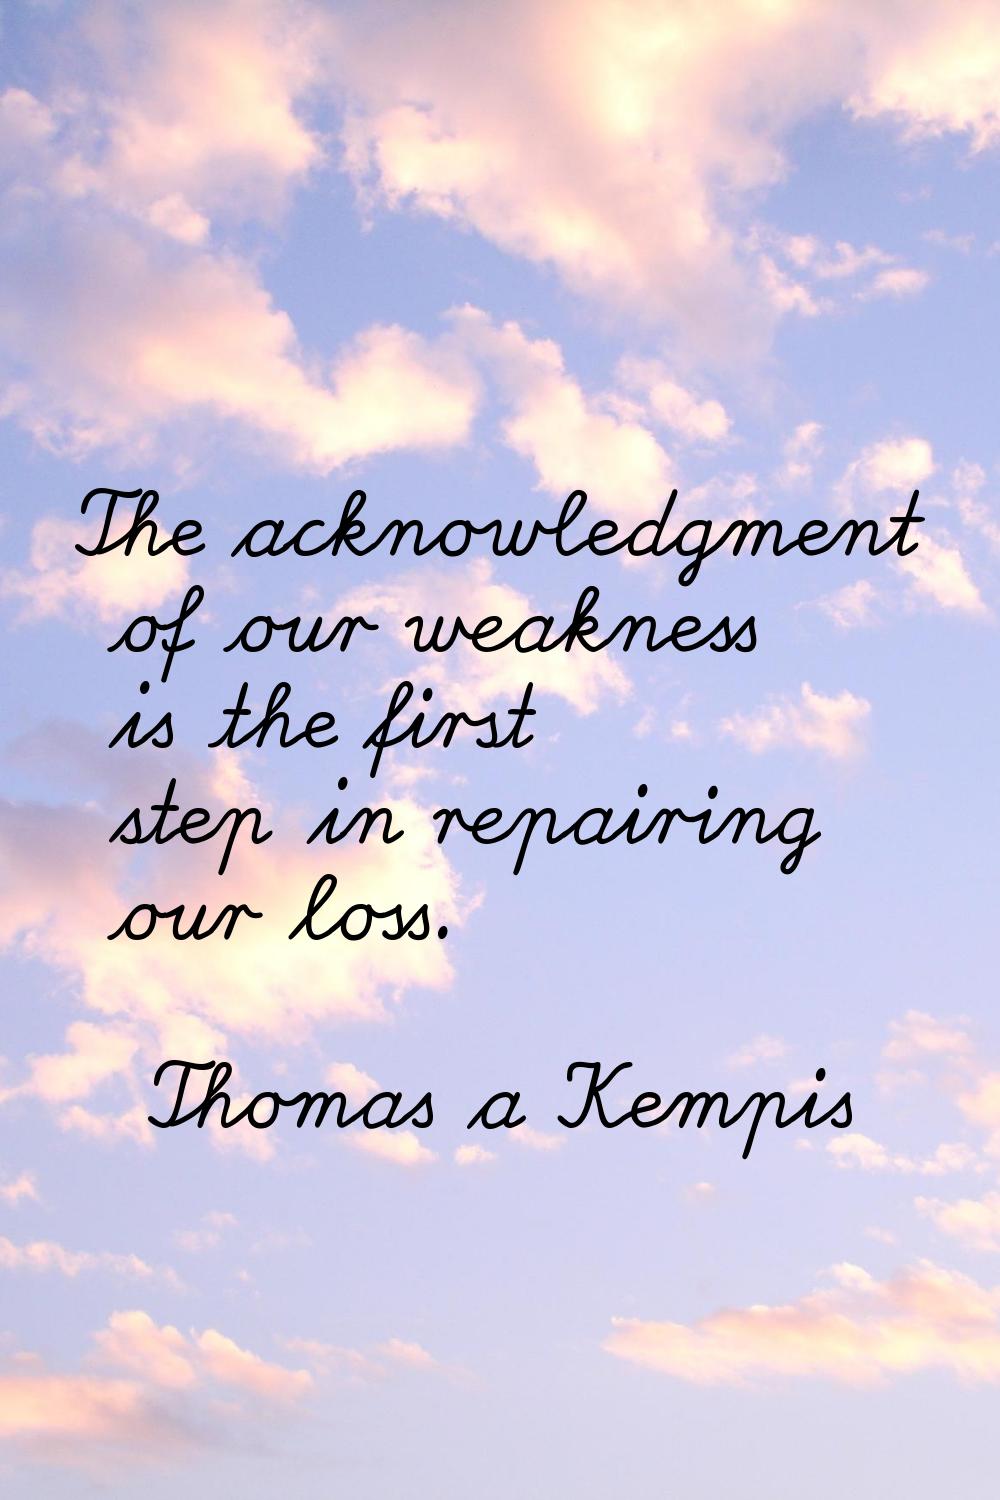 The acknowledgment of our weakness is the first step in repairing our loss.